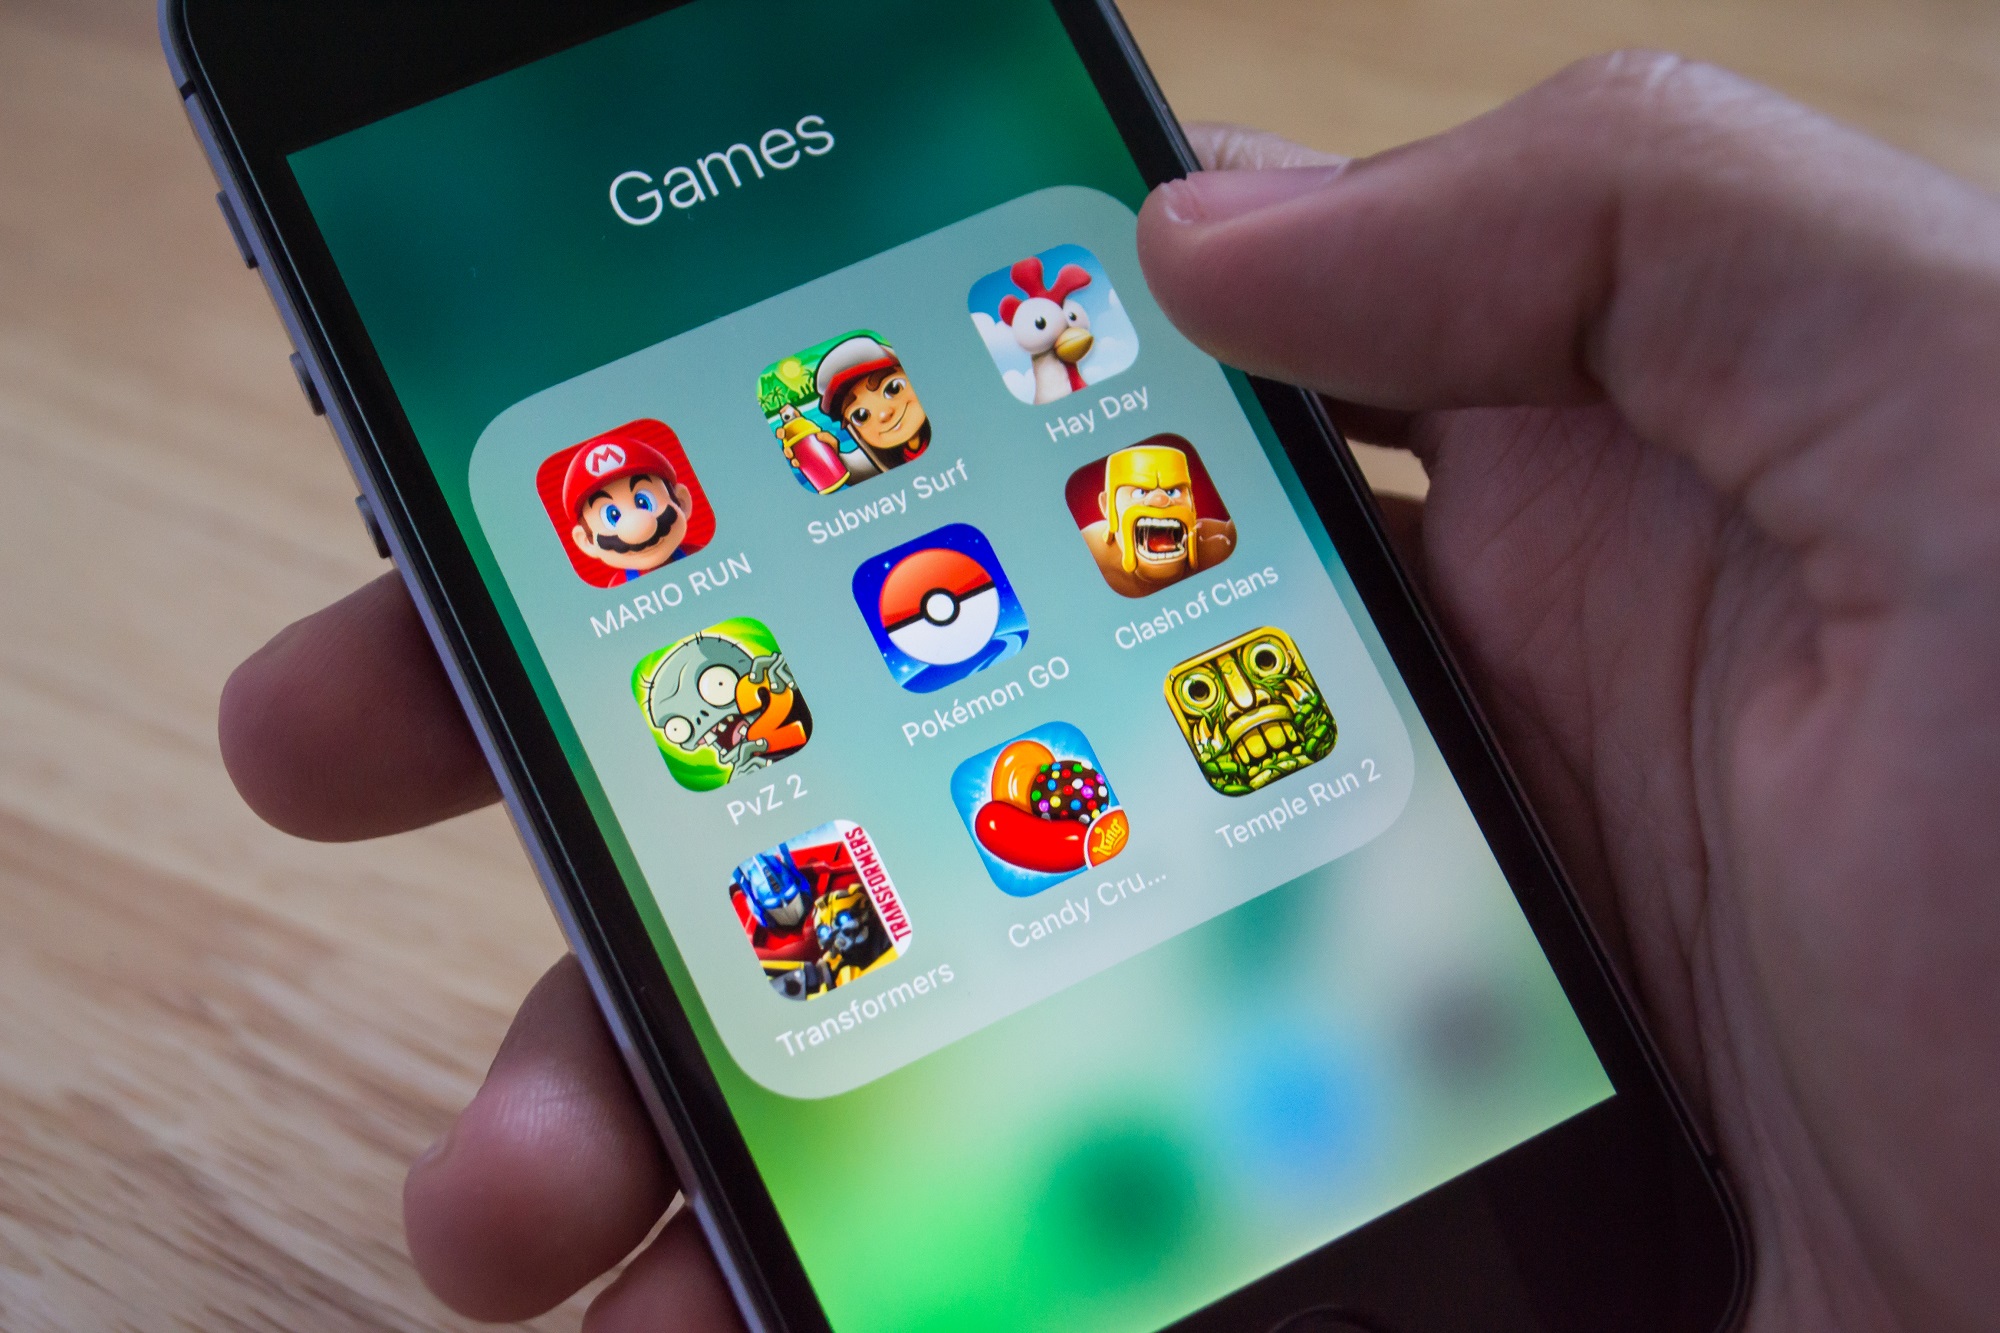 15 Best iPhone Games to Play with Friends in 2020